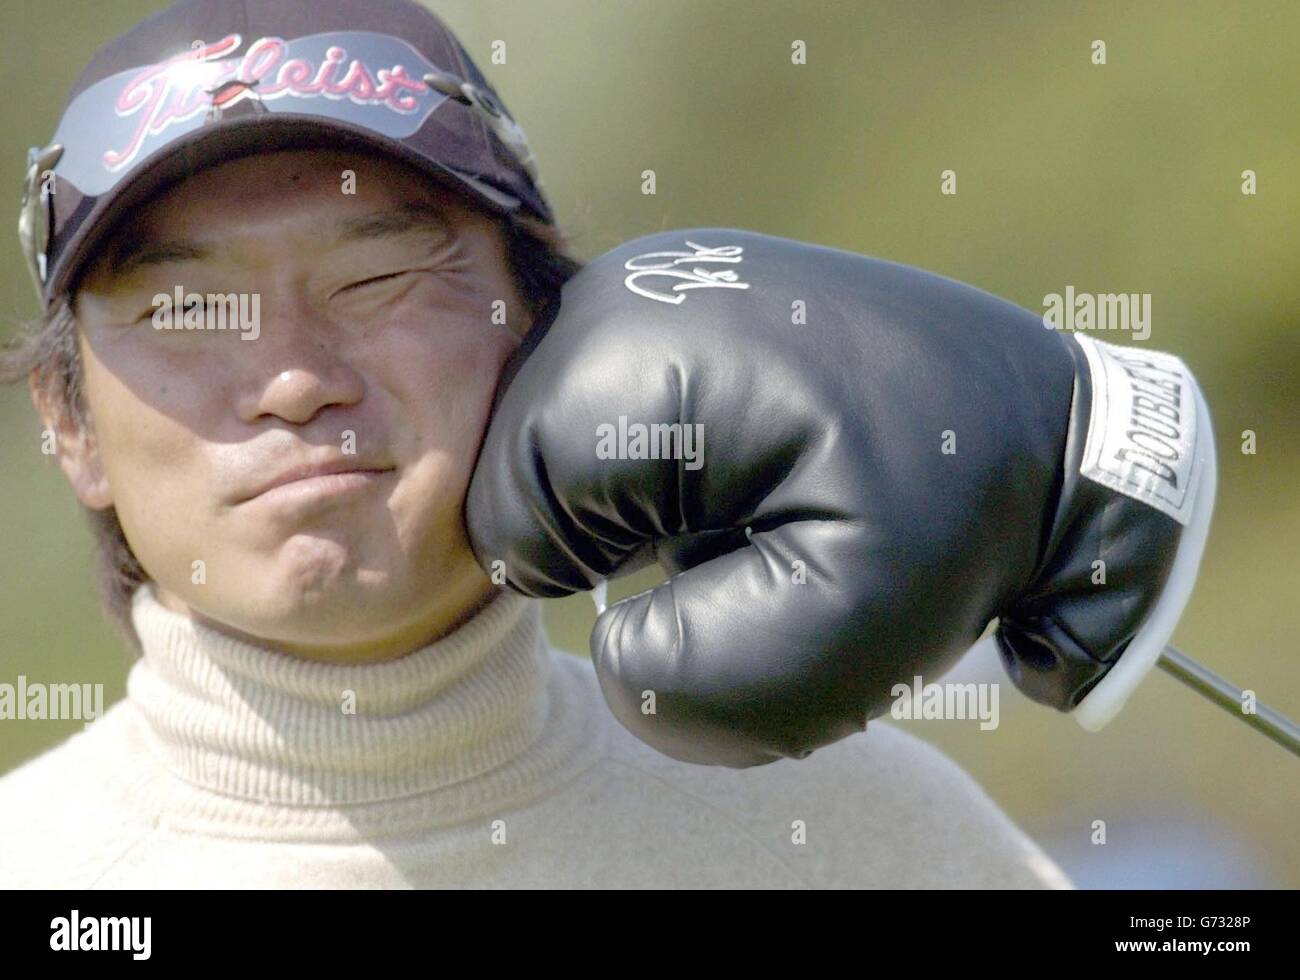 Japan's Yoshinobu Tsukada has some fun with his golf club cover, a boxing glove, held by his caddie, during a practice round for the 133rd Open Championship at Royal Troon Golf Club, Scotland. NO MOBILE PHONE USE Stock Photo